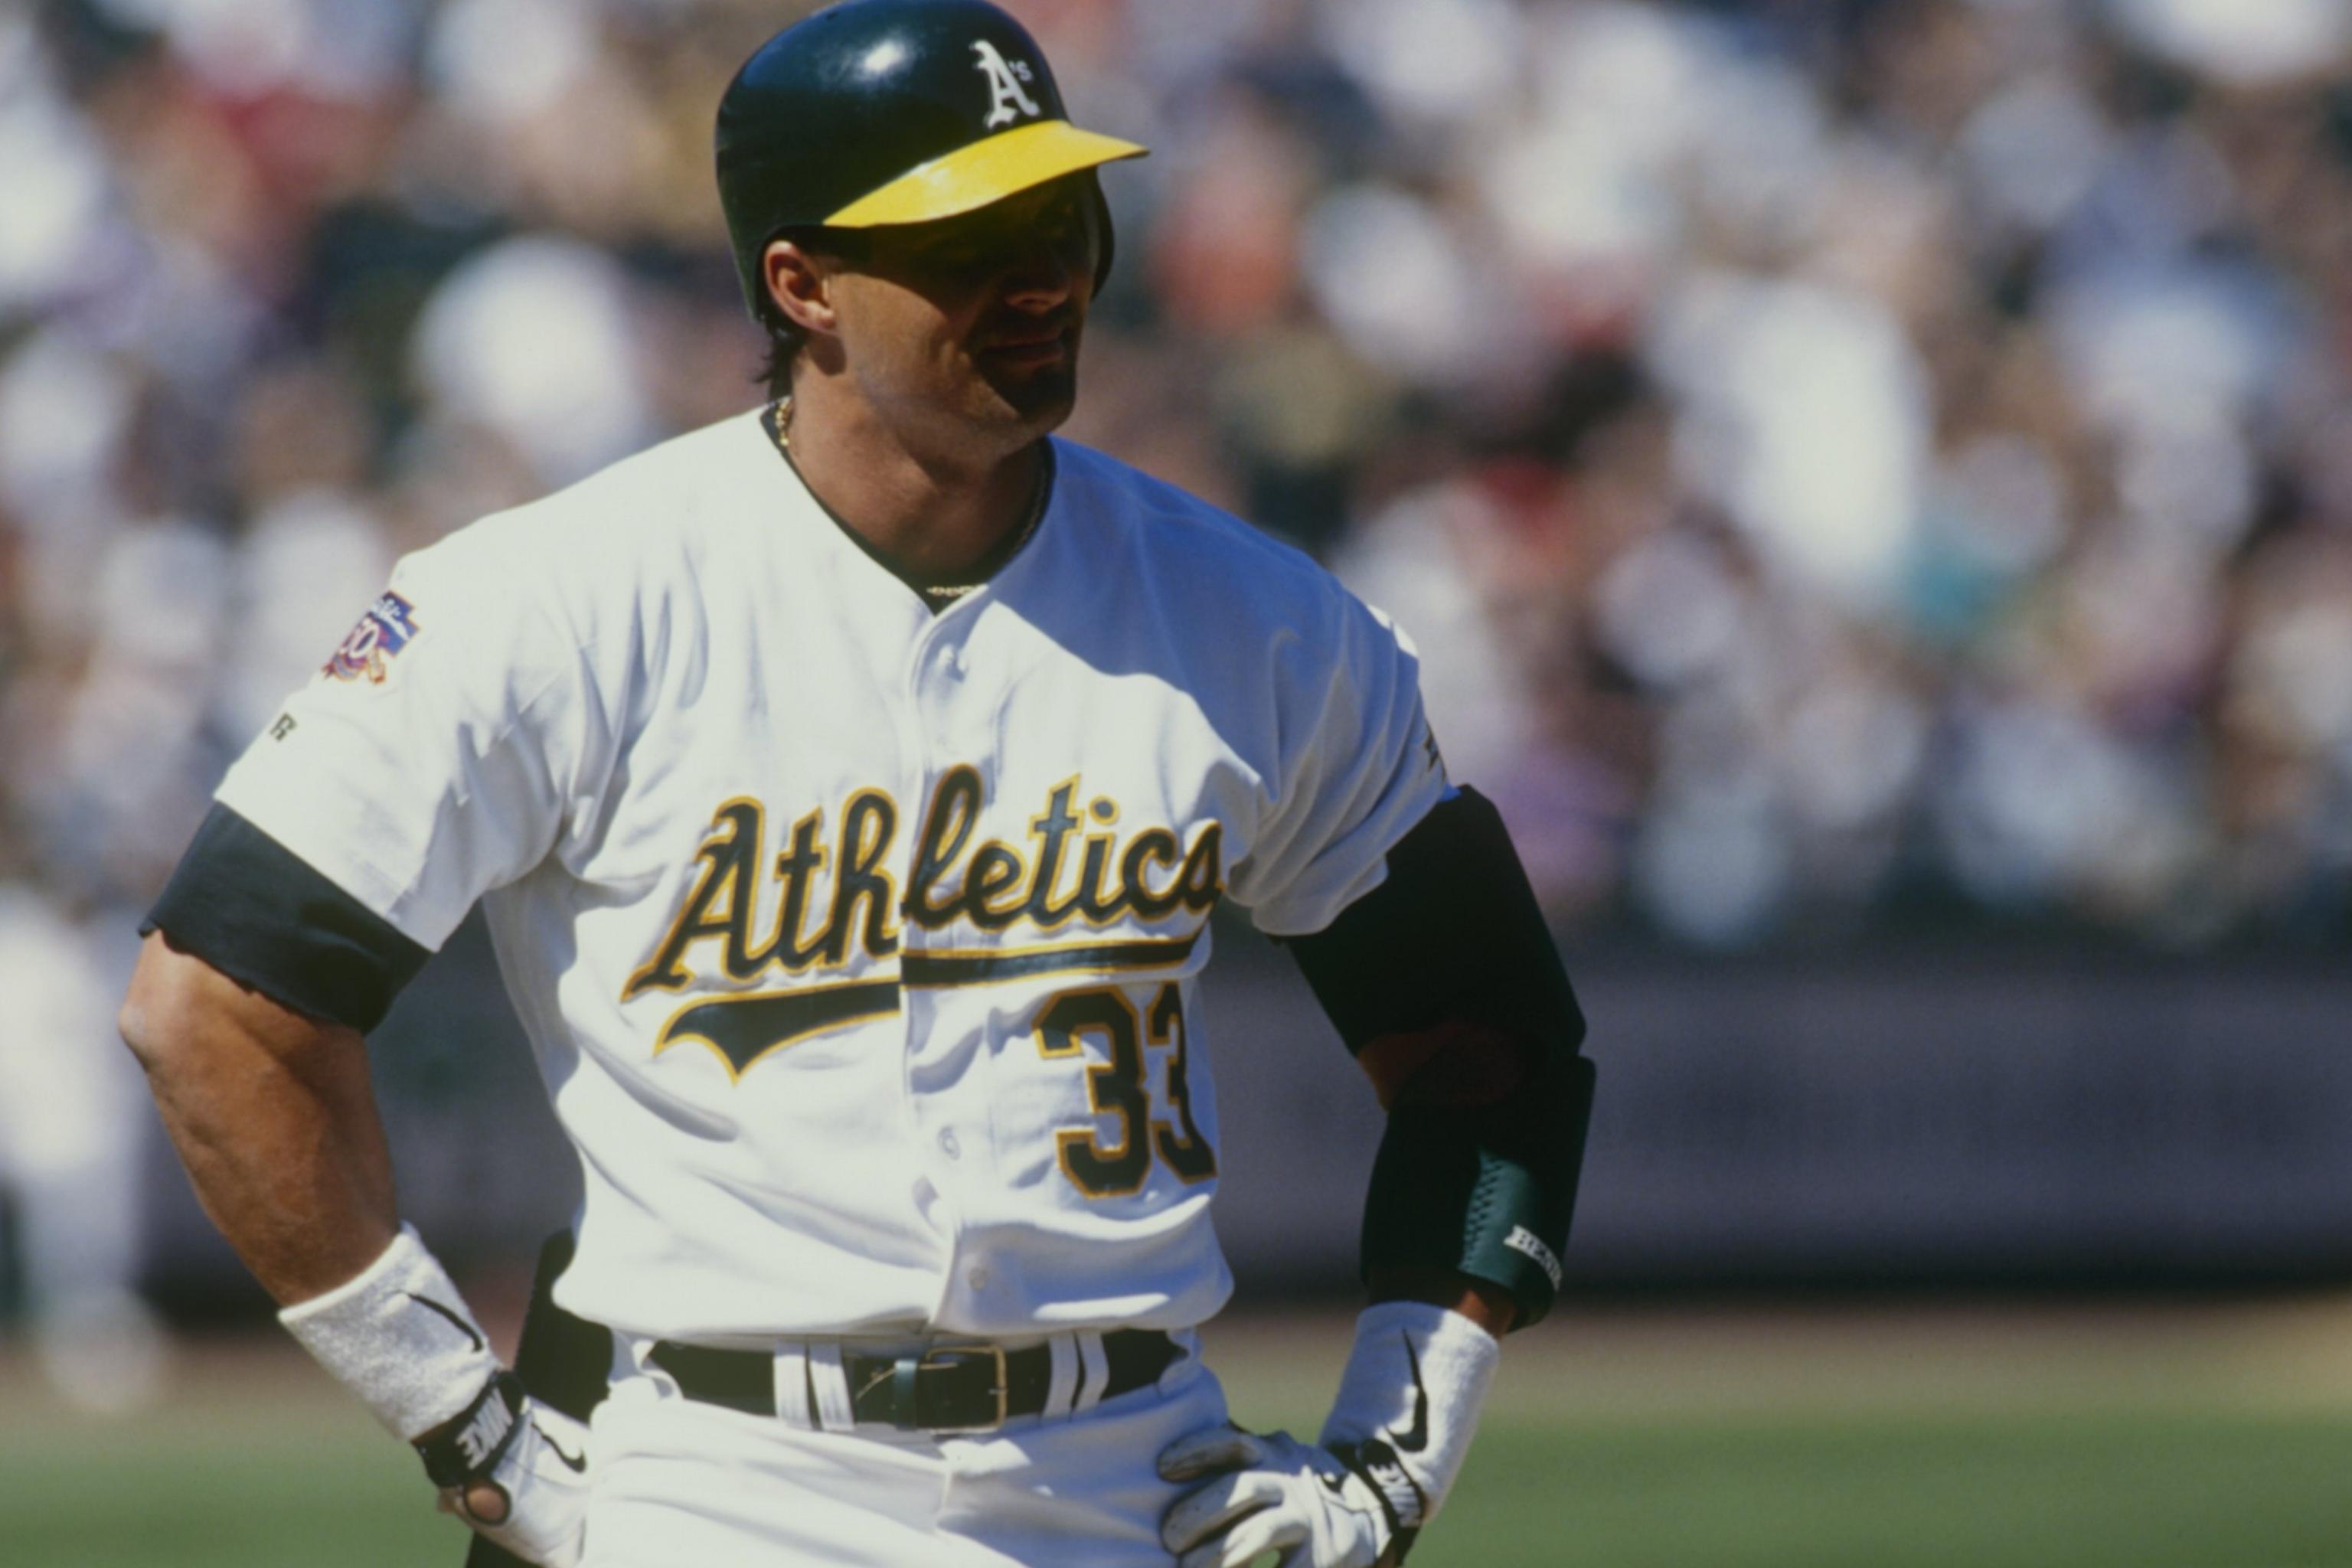 Jose Canseco became the first member of the 40-40 club on this day in